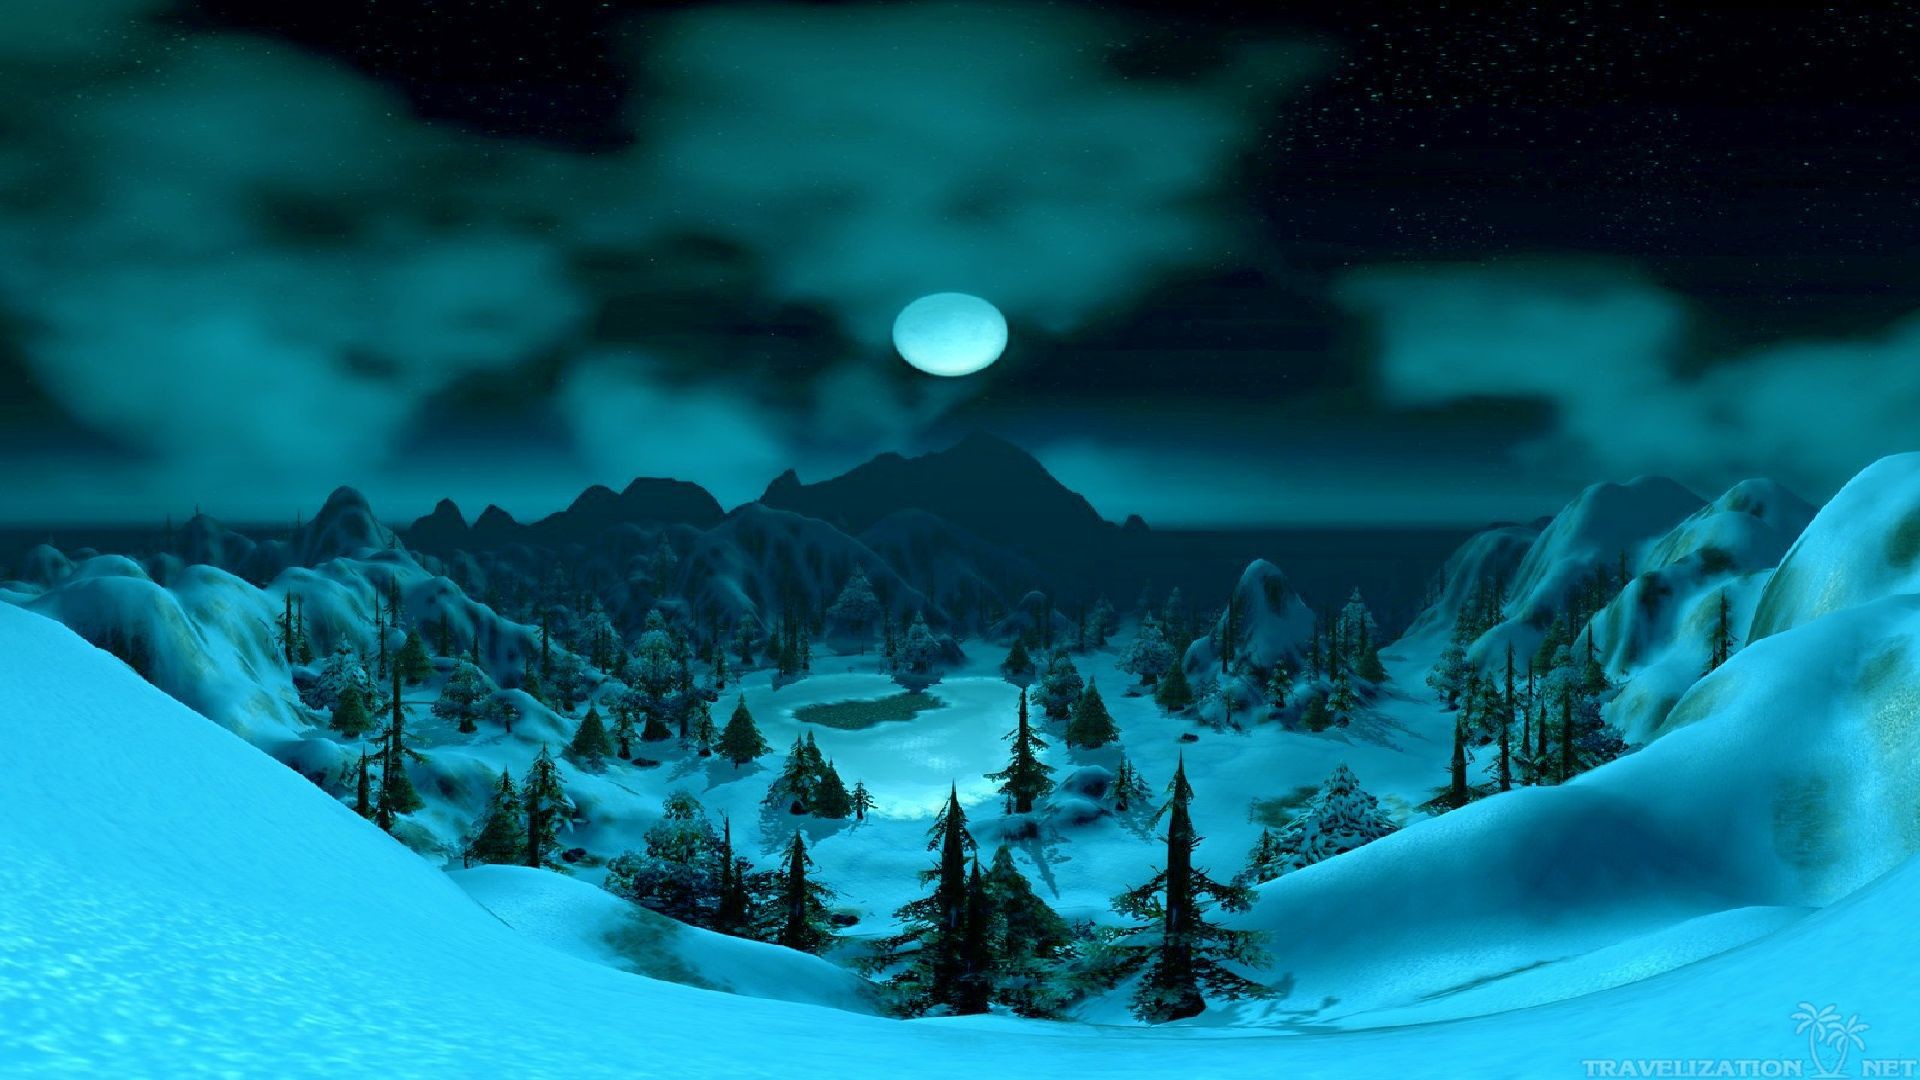 1920x1080 You can find Full Moon In Winter Night Wallpapers in many resolution such  as 1024Ã768, 1280Ã1024, 1366Ã768, ...